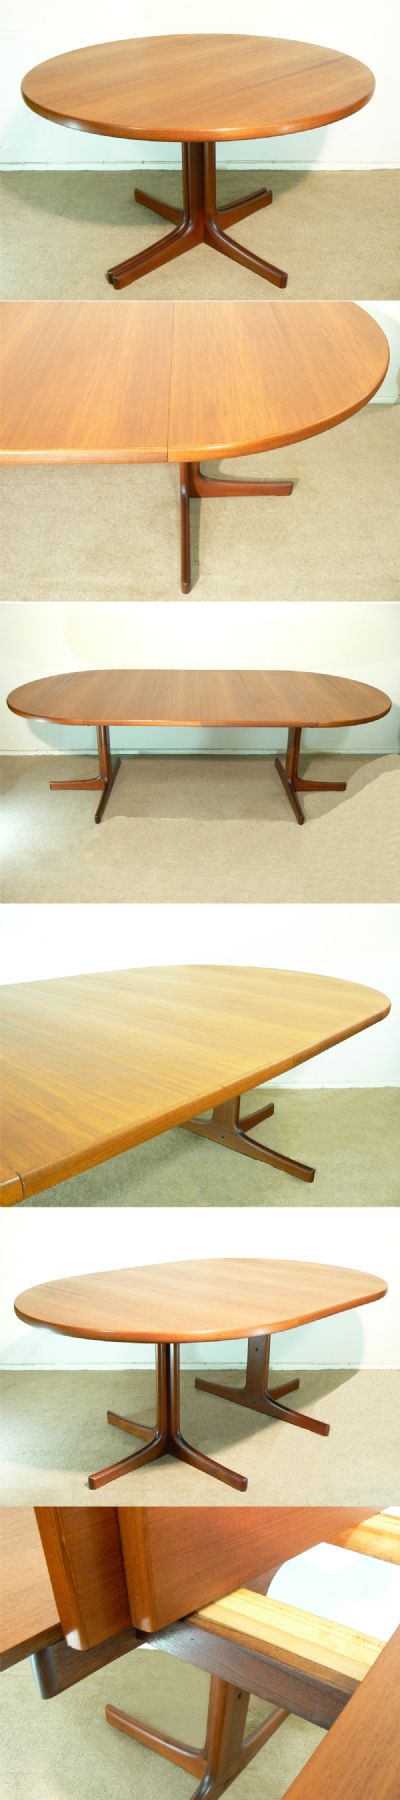 A large Danish teak dining table c1970s. Large versatile table, extends via two leaves or can be used with just one.